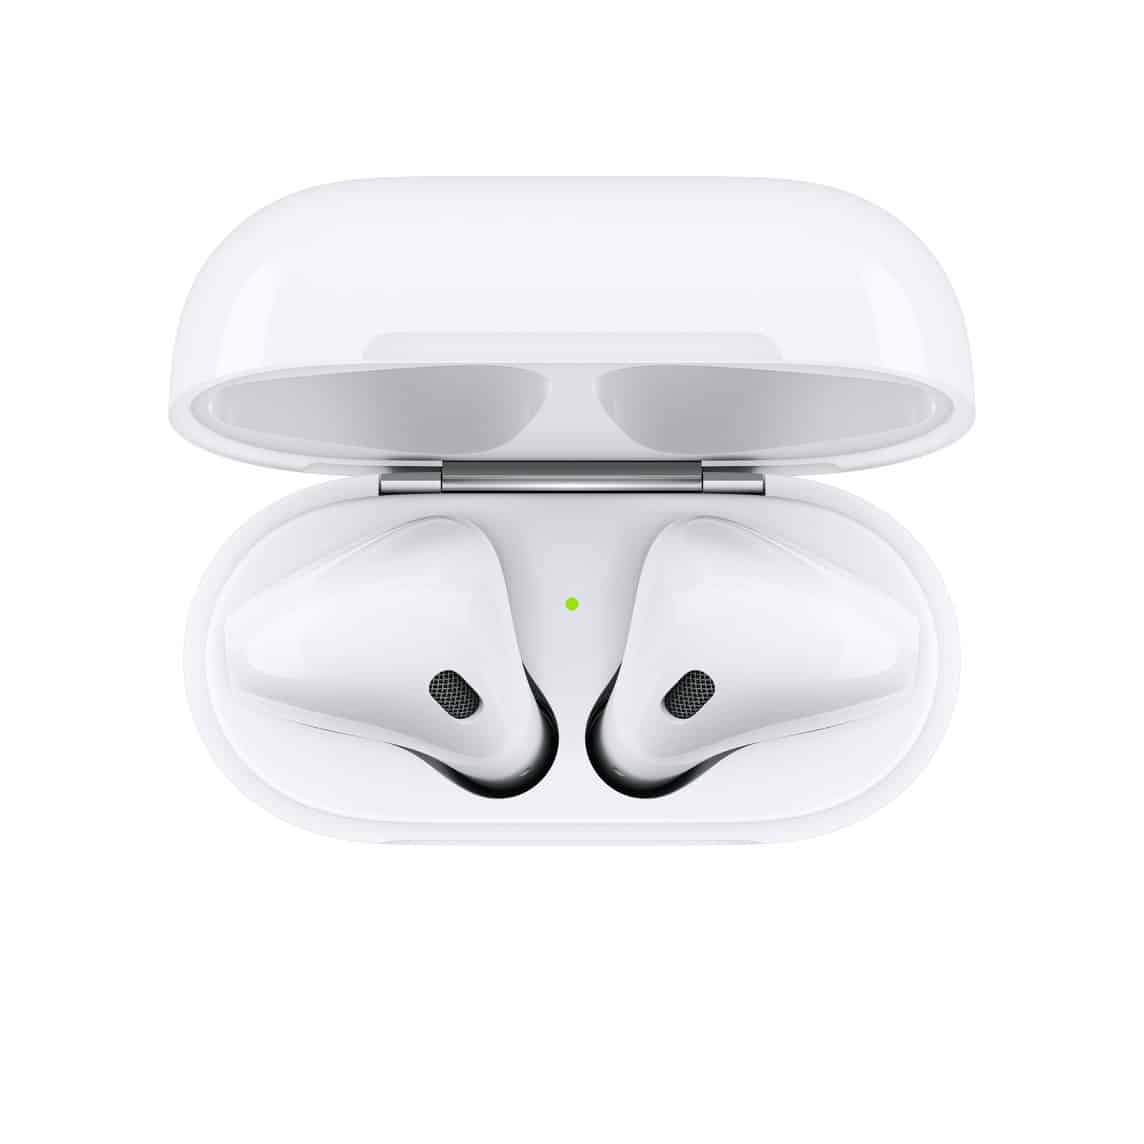 How To Tell If AirPods are Fake